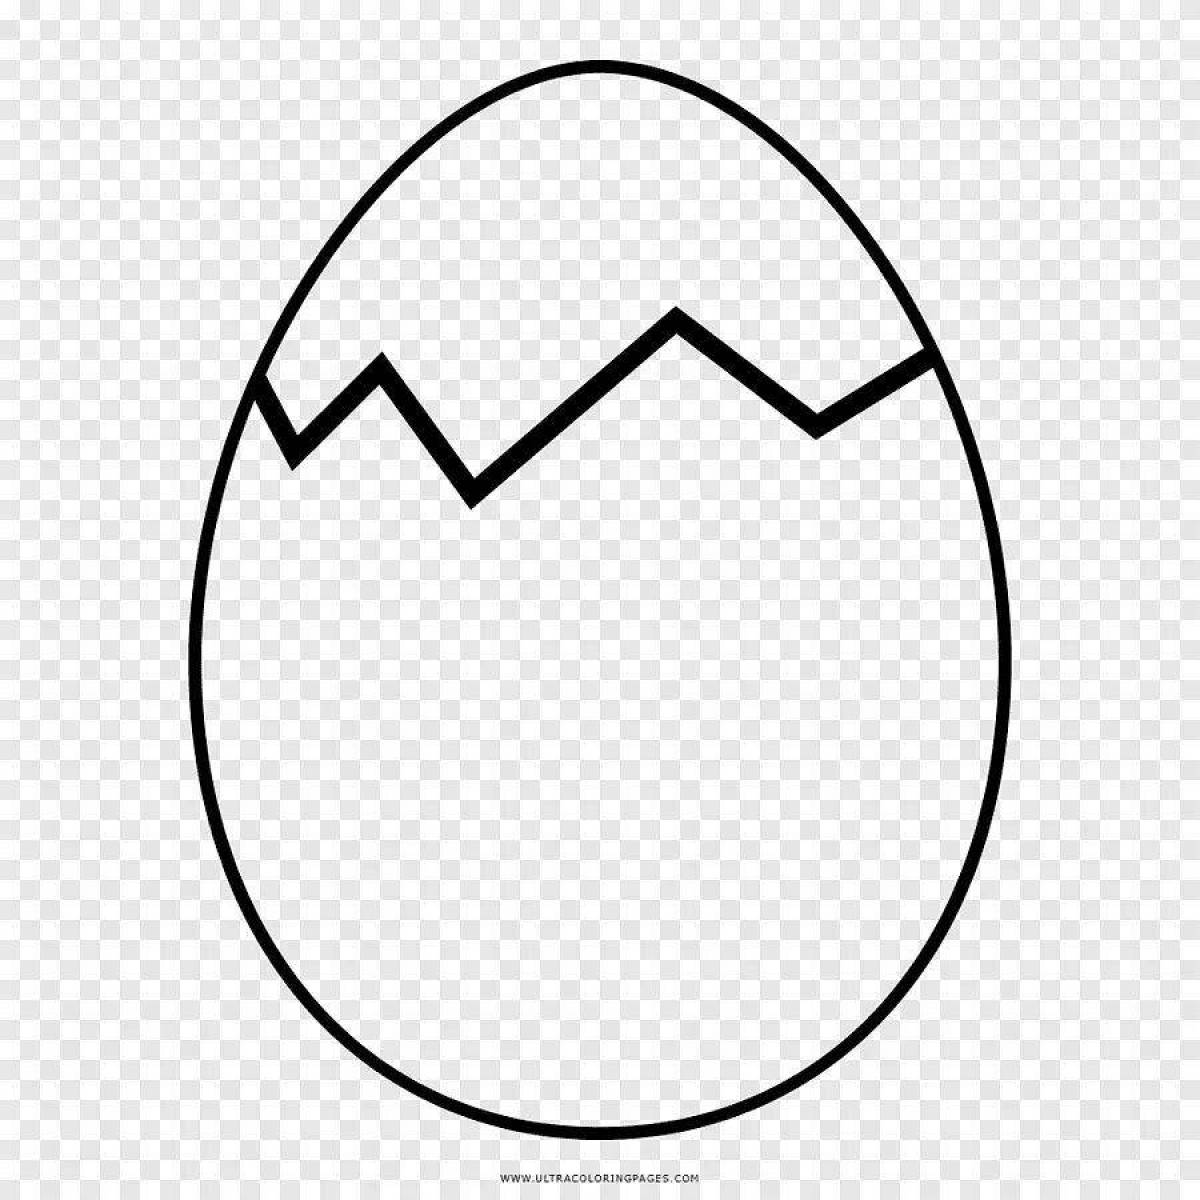 Adorable chicken egg coloring page